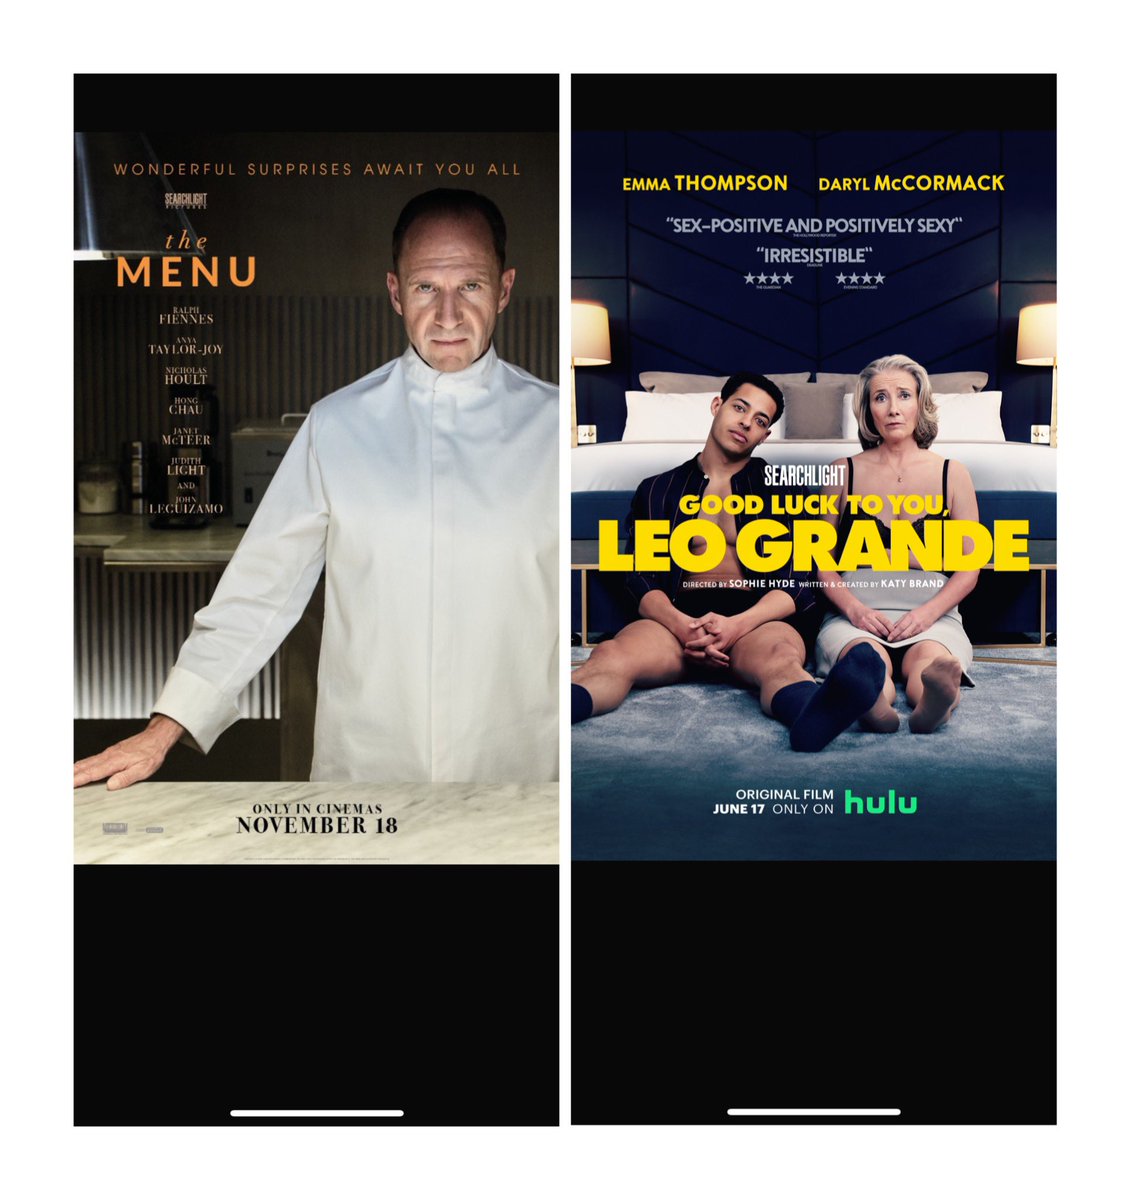 I was lucky enough to watch two great movies this week, which I would encourage my friends to watch too! Ralph Fiennes and Emma Thompson are just sublime; definitely among the best of their generation! I loved #TheMenuFilm and #GoodLucktoYouLeoGrande 👌👌